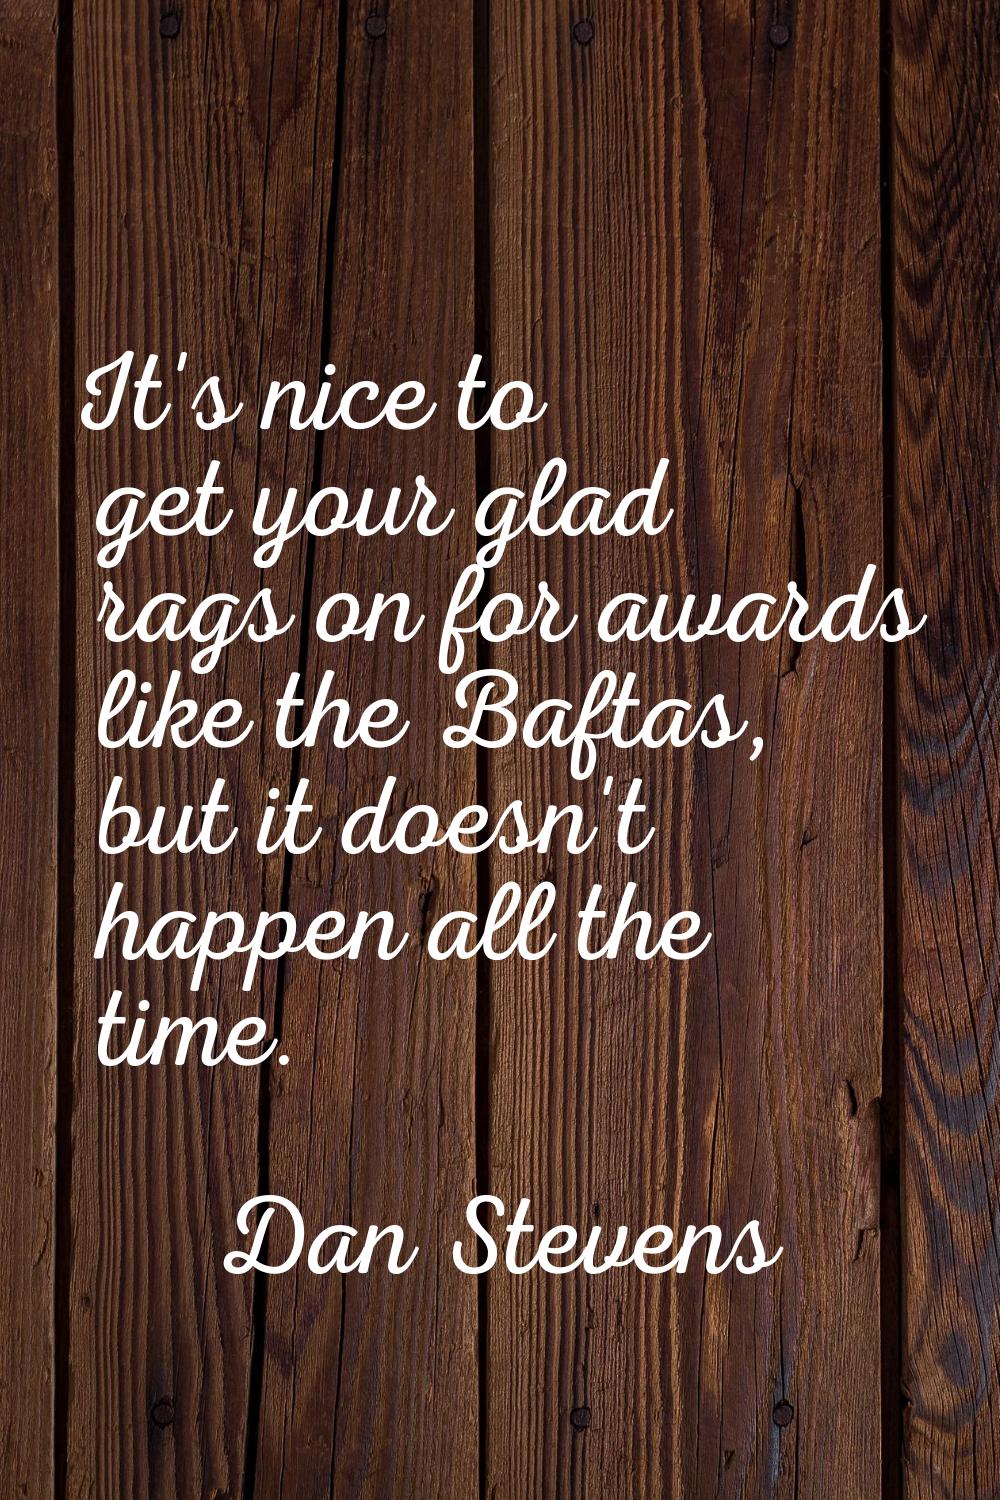 It's nice to get your glad rags on for awards like the Baftas, but it doesn't happen all the time.